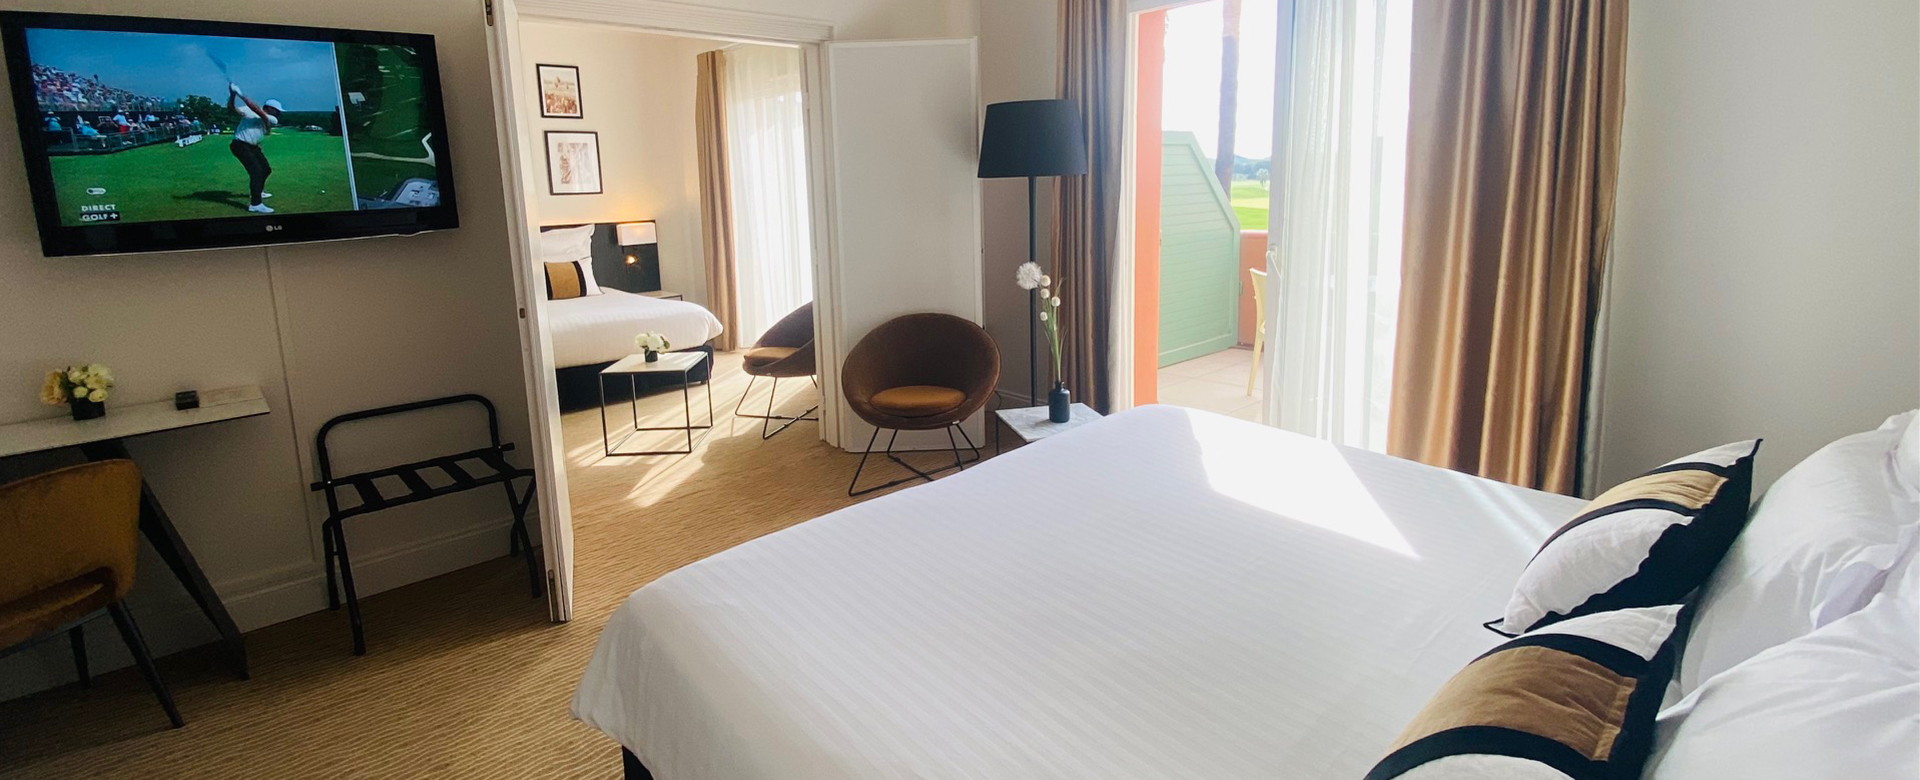 View of a suite with 1 double bed and a view over the golf course at the Palmyra Golf, a hotel with a spa in Occitanie